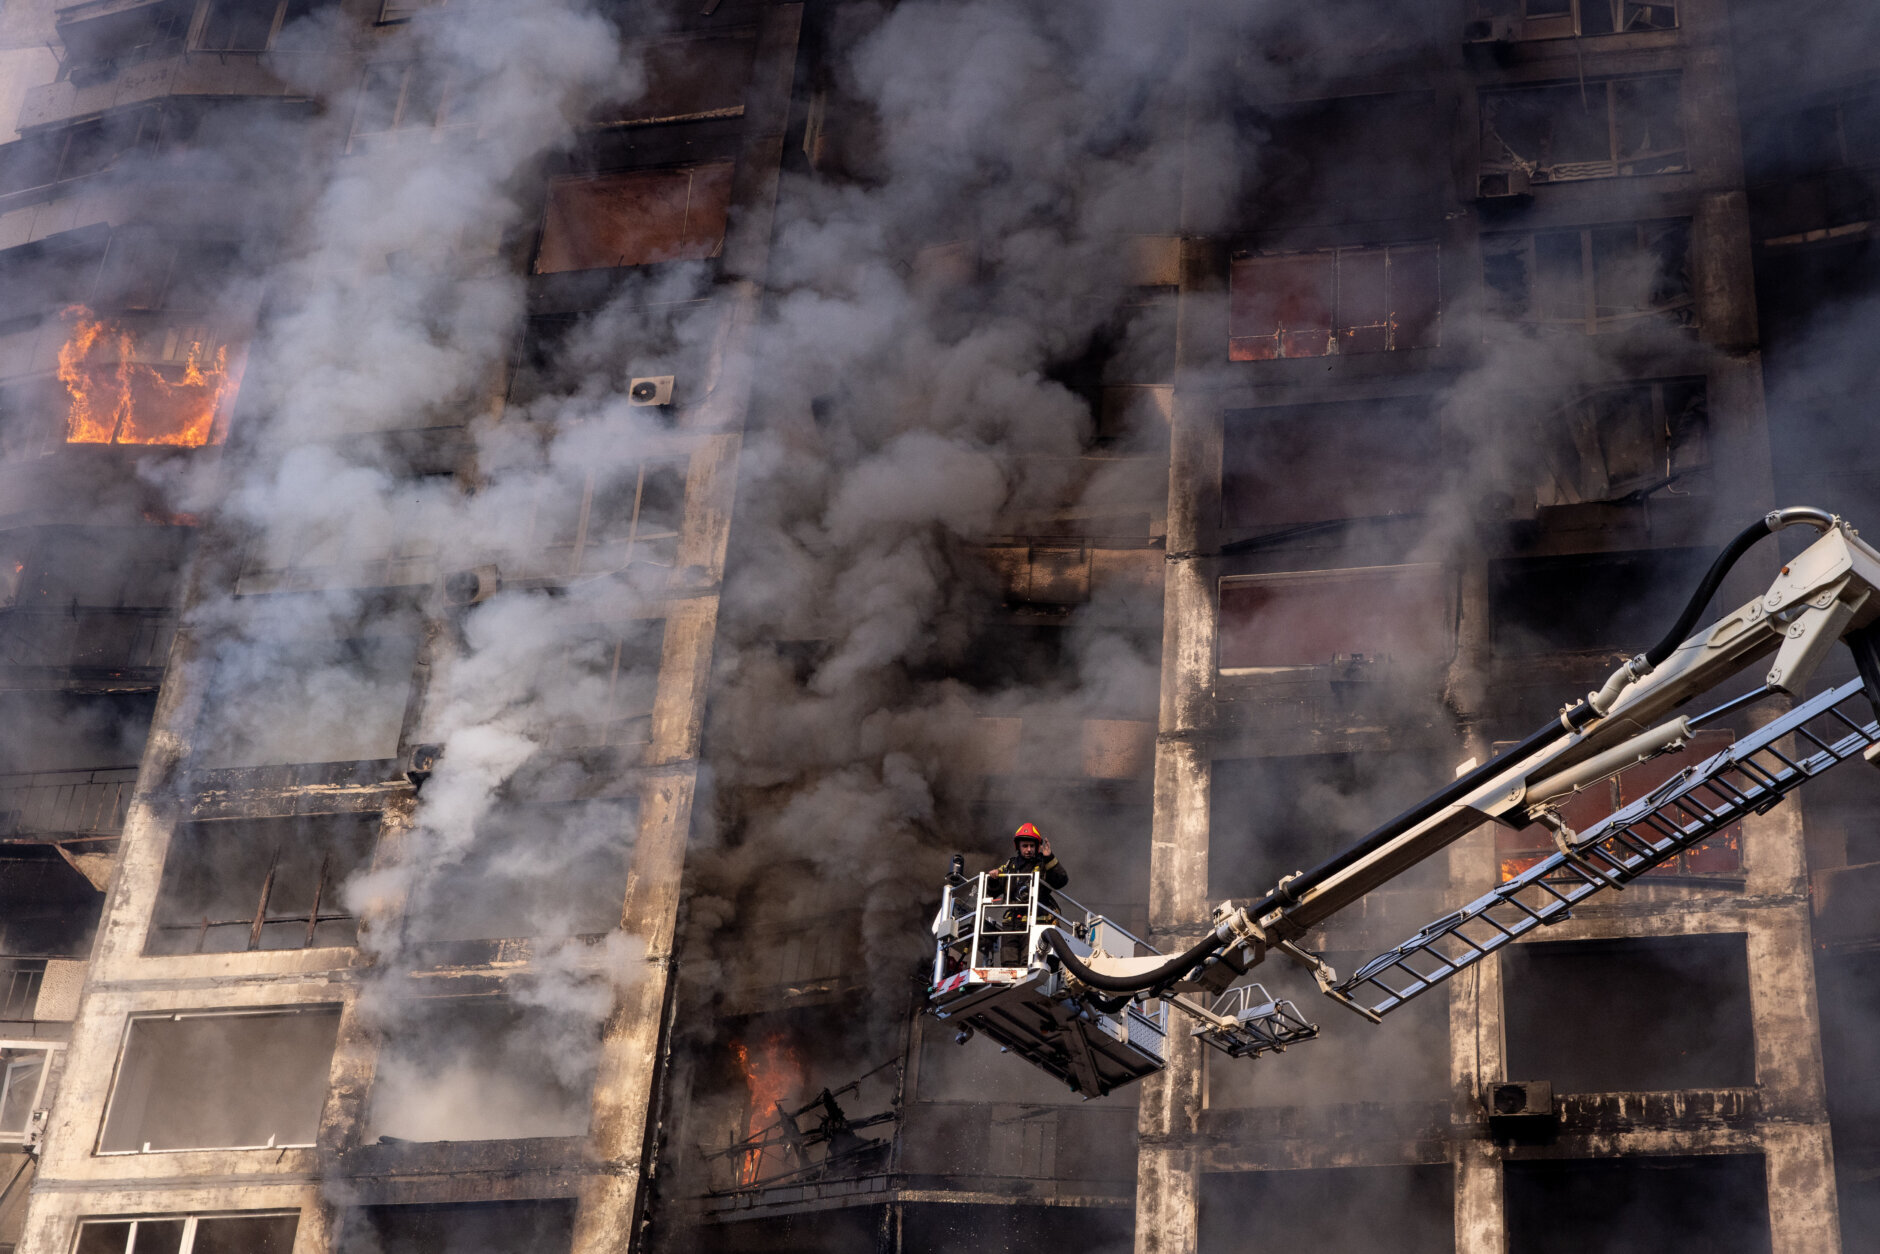 <p>Firefighters work to extinguish a fire at a residential apartment building after it was hit by a Russian attack in the early hours of the morning in the Sviatoshynskyi District on March 15, 2022 in Kyiv, Ukraine. Russian forces continue to attempt to encircle the Ukrainian capital, although they have faced stiff resistance and logistical challenges since launching a large-scale invasion of Ukraine last month. Russian troops are advancing from the northwest and northeast of the city.</p>
